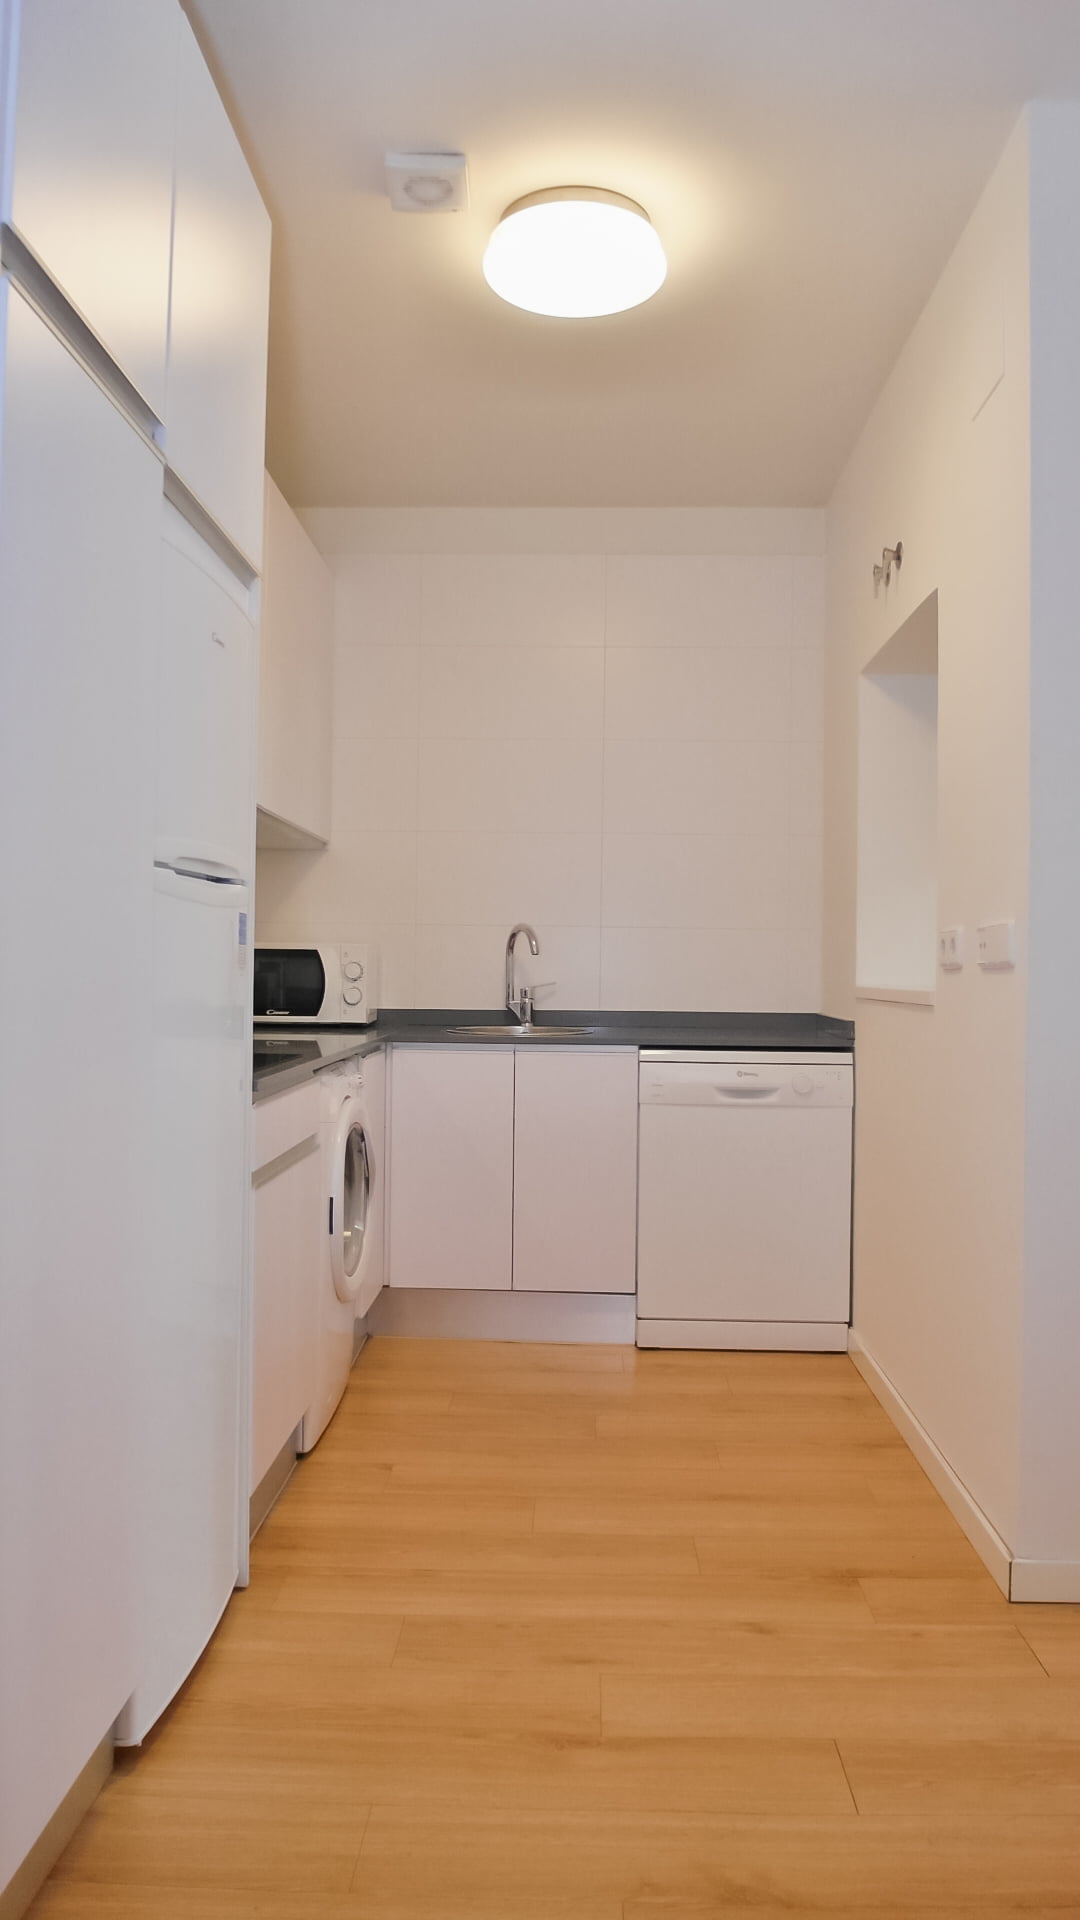 Apartment in Lavapies for expats